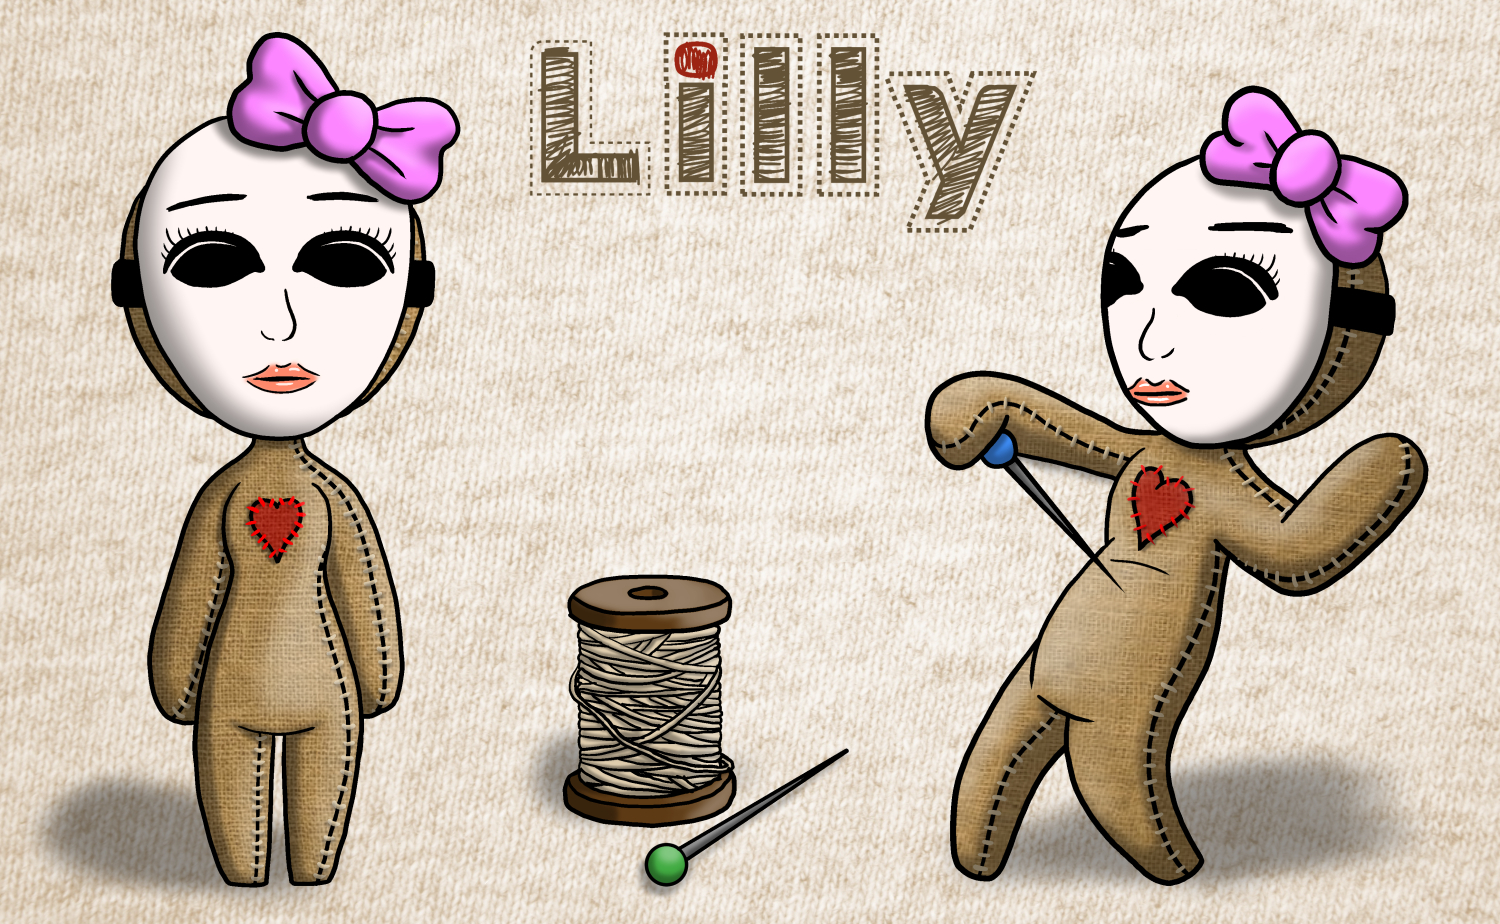 Fun Fact:  Lilly will be a key character in the YOE universe.